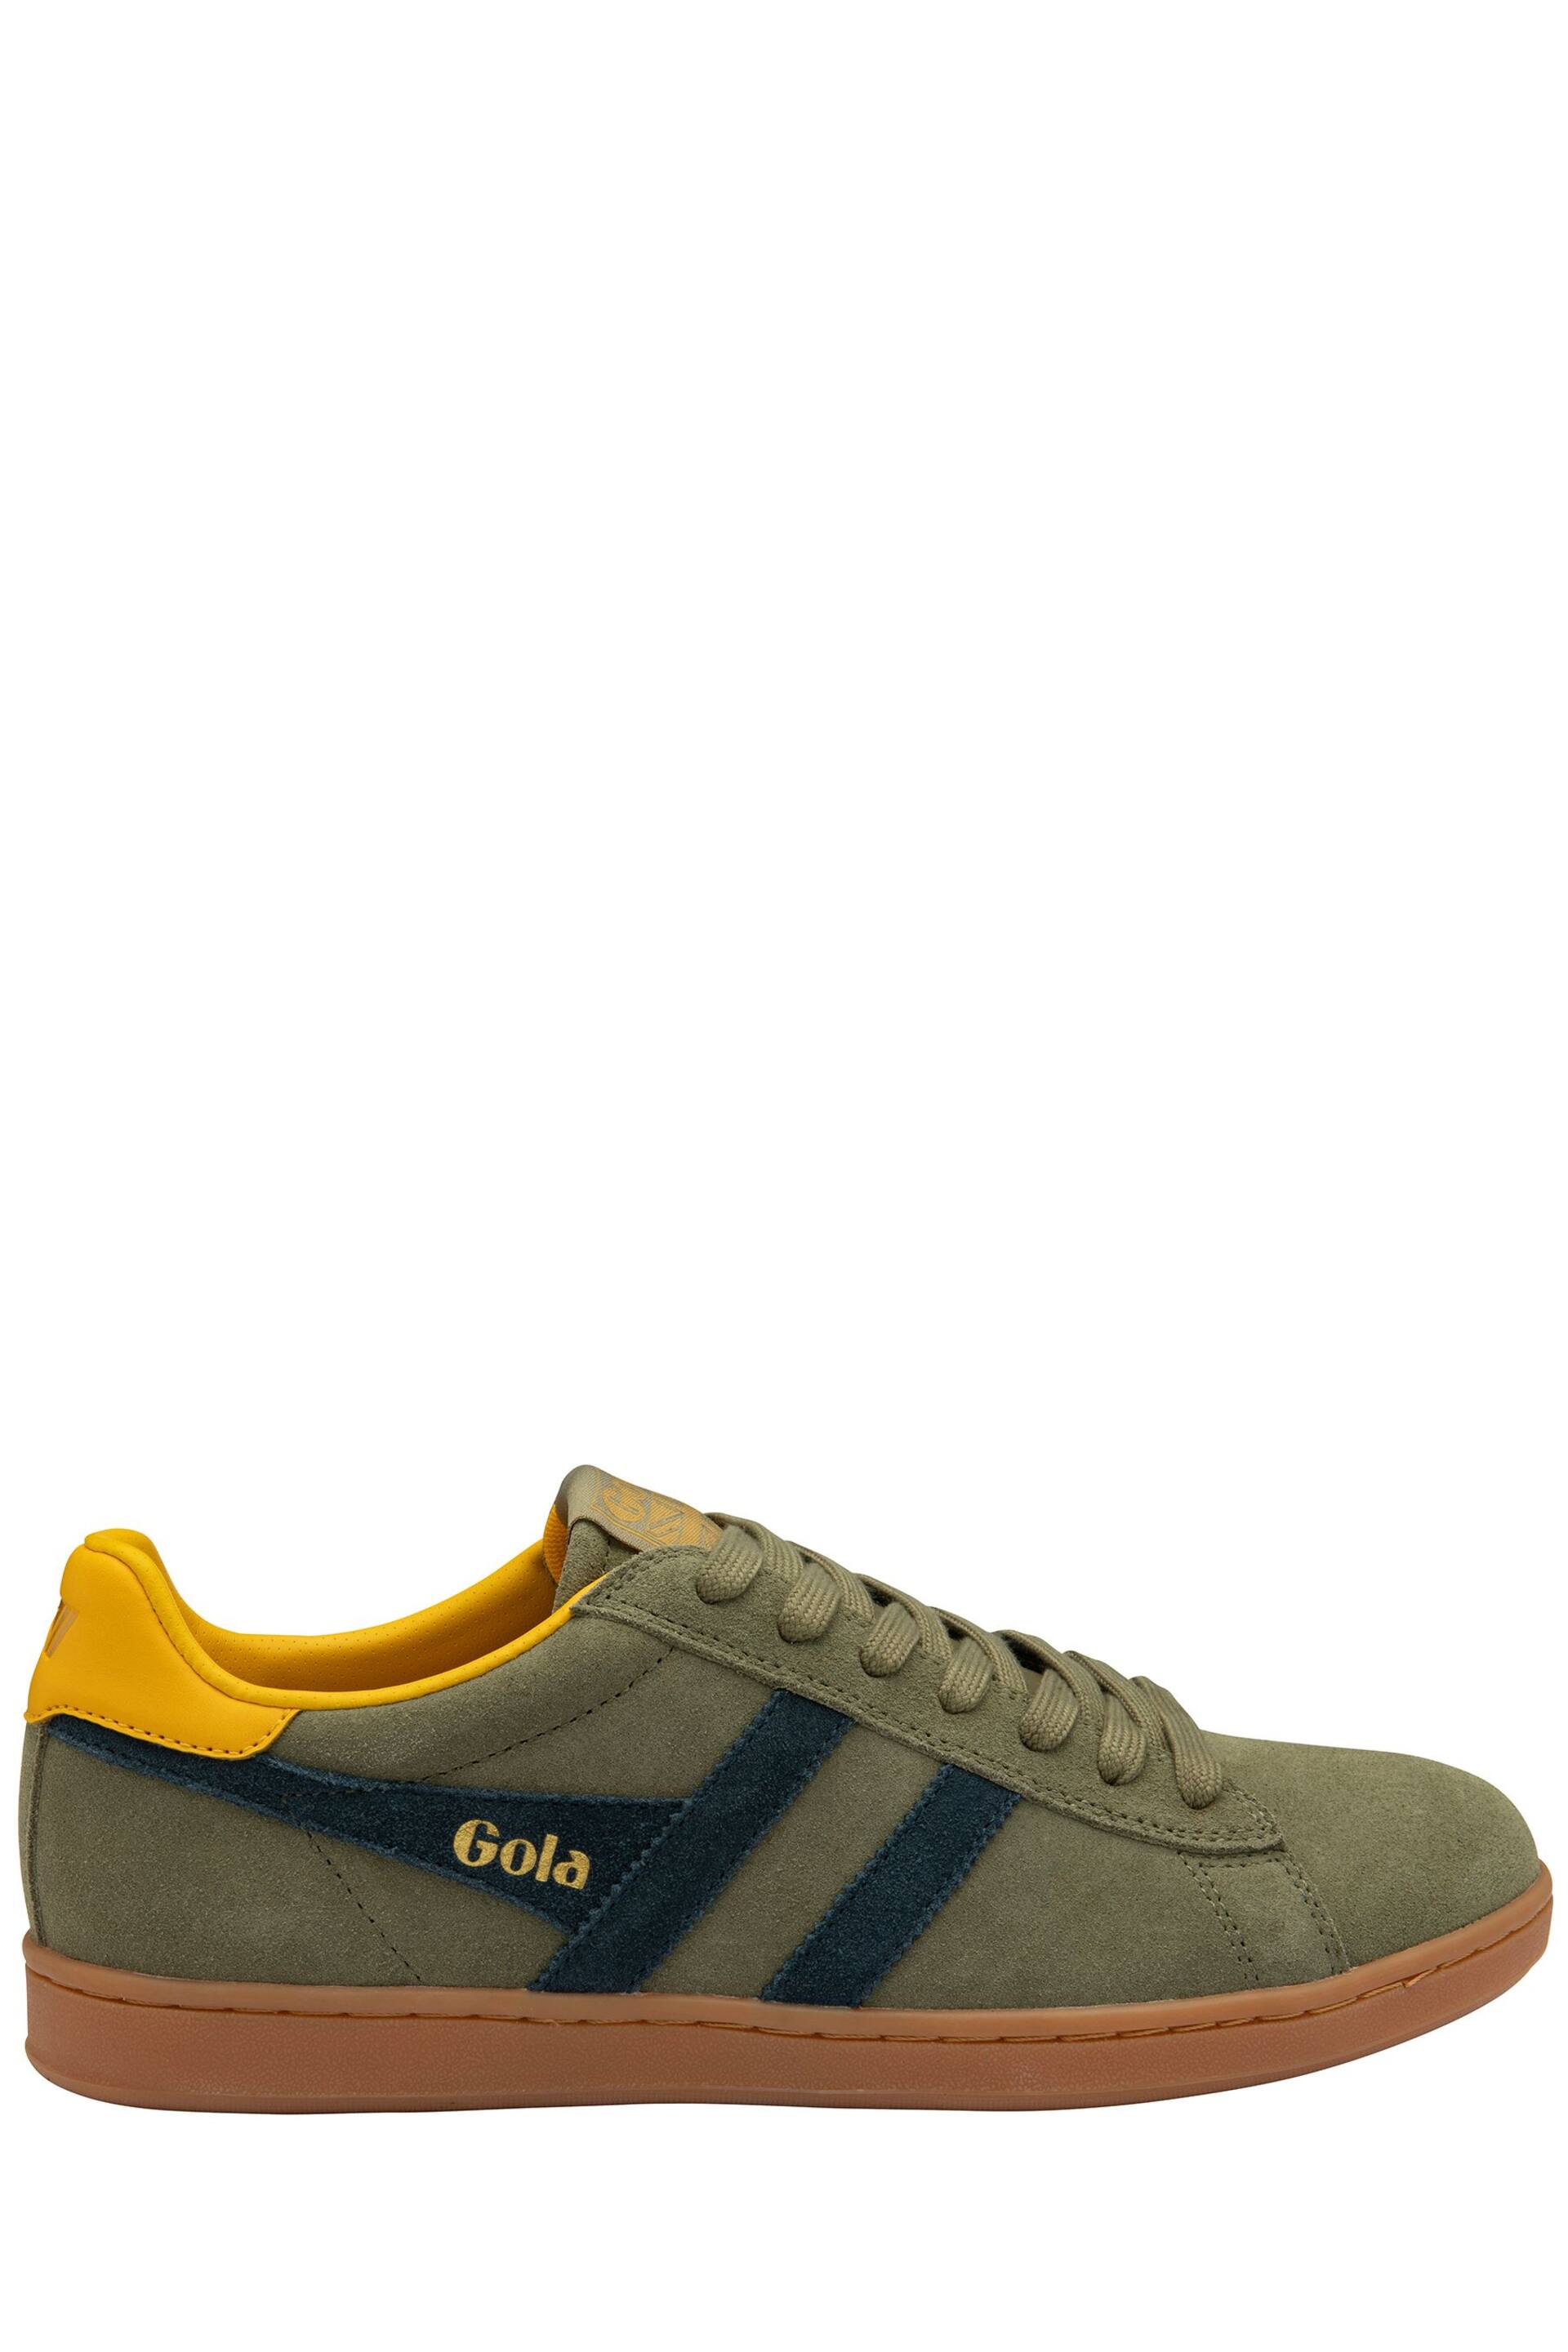 Gola Khaki/Navy/Sun Men's Equipe II Leather Lace-Up Trainers - Image 1 of 4